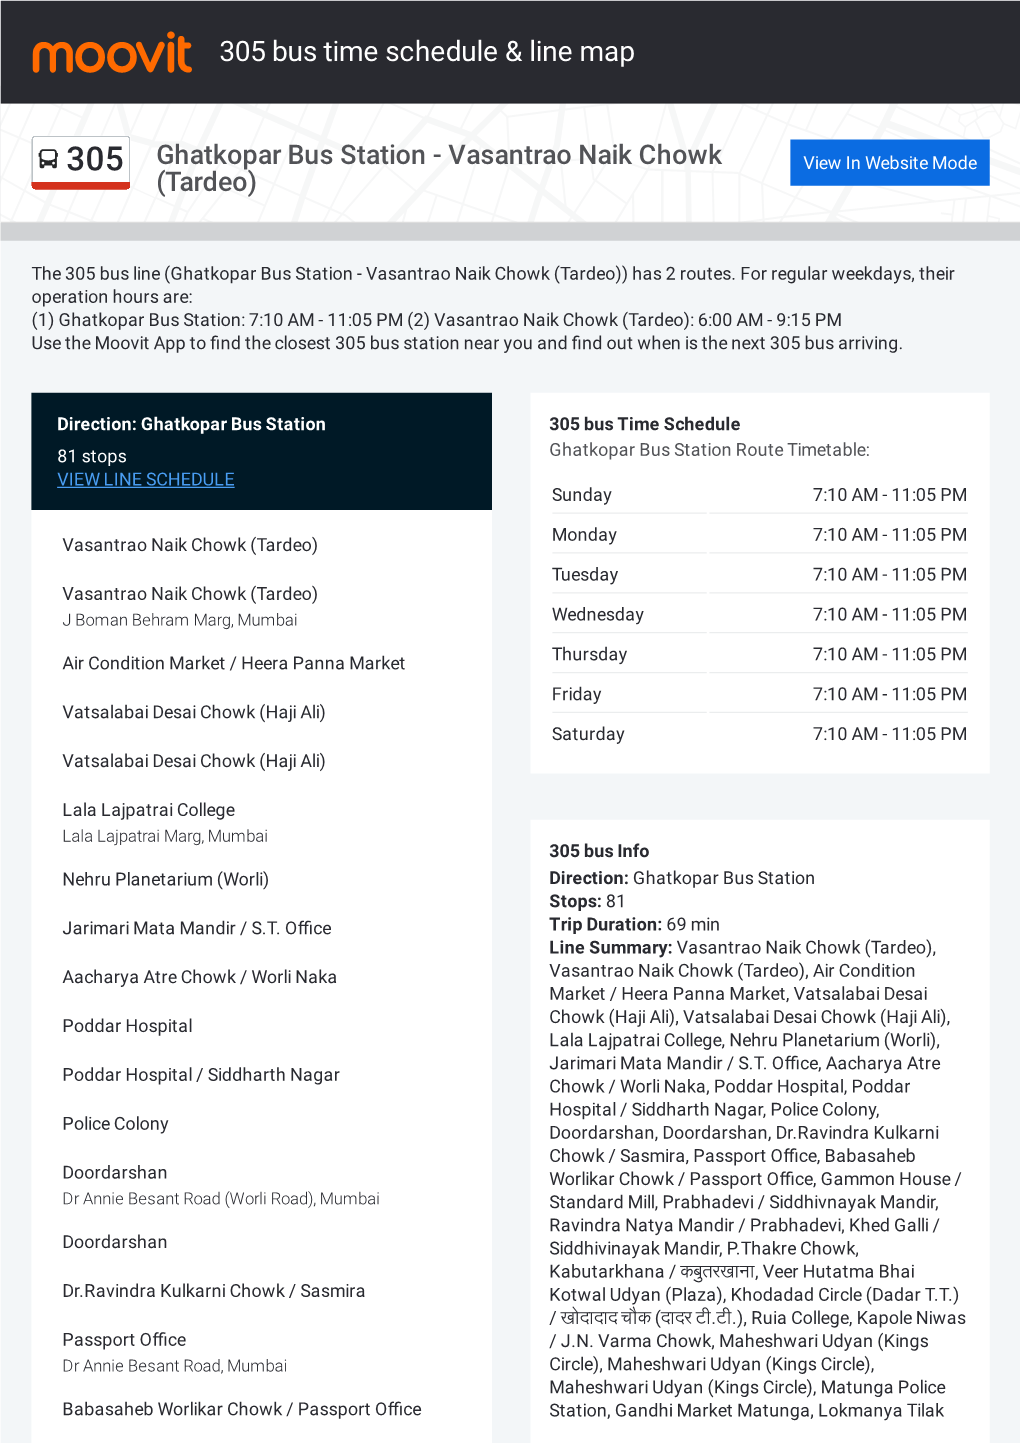 305 Bus Time Schedule & Line Route